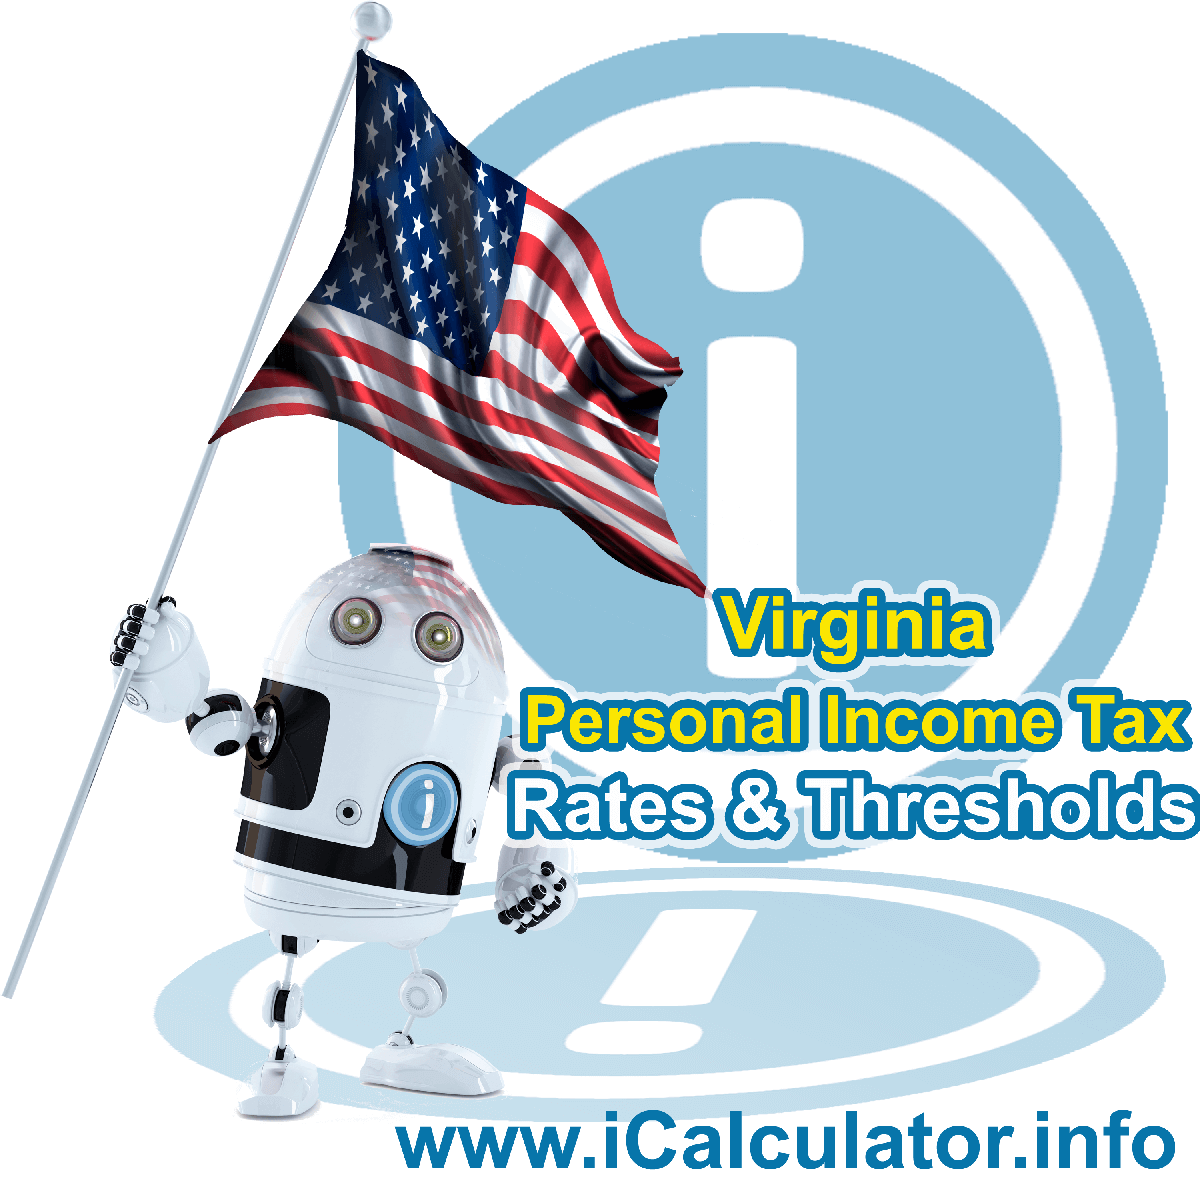 Virginia State Tax Tables 2019. This image displays details of the Virginia State Tax Tables for the 2019 tax return year which is provided in support of the 2019 US Tax Calculator